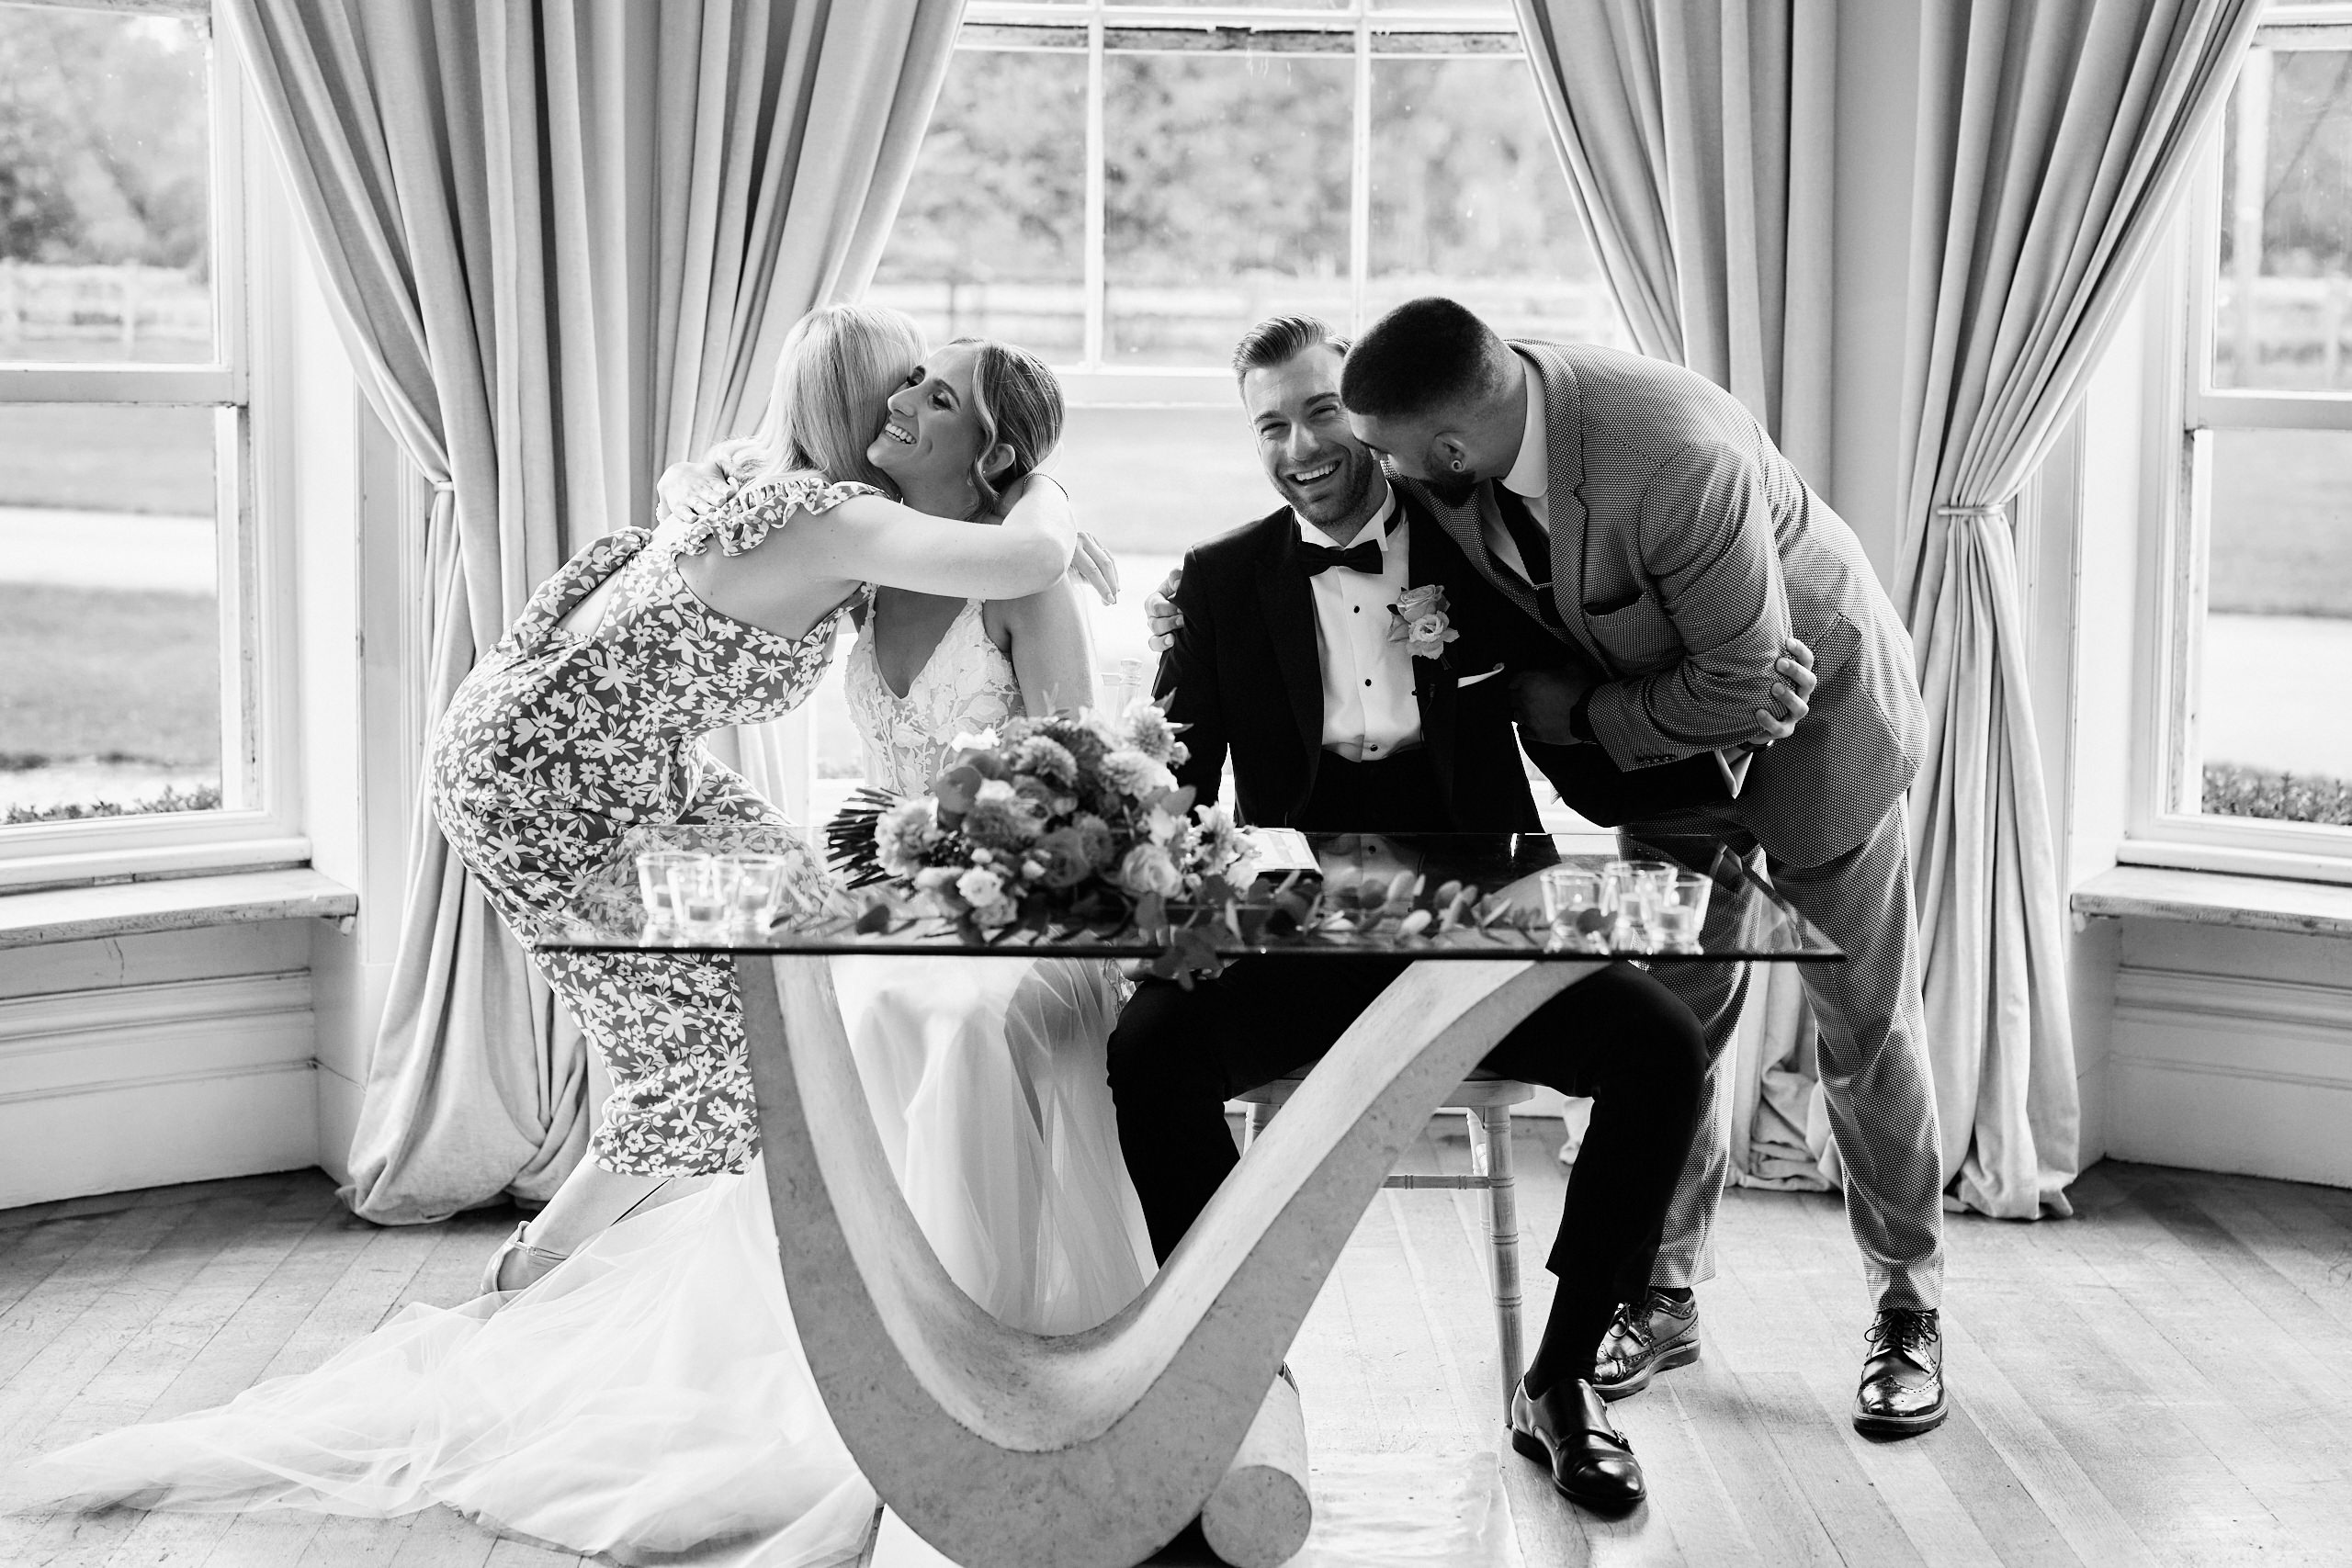 A bride and groom kissing at a table.